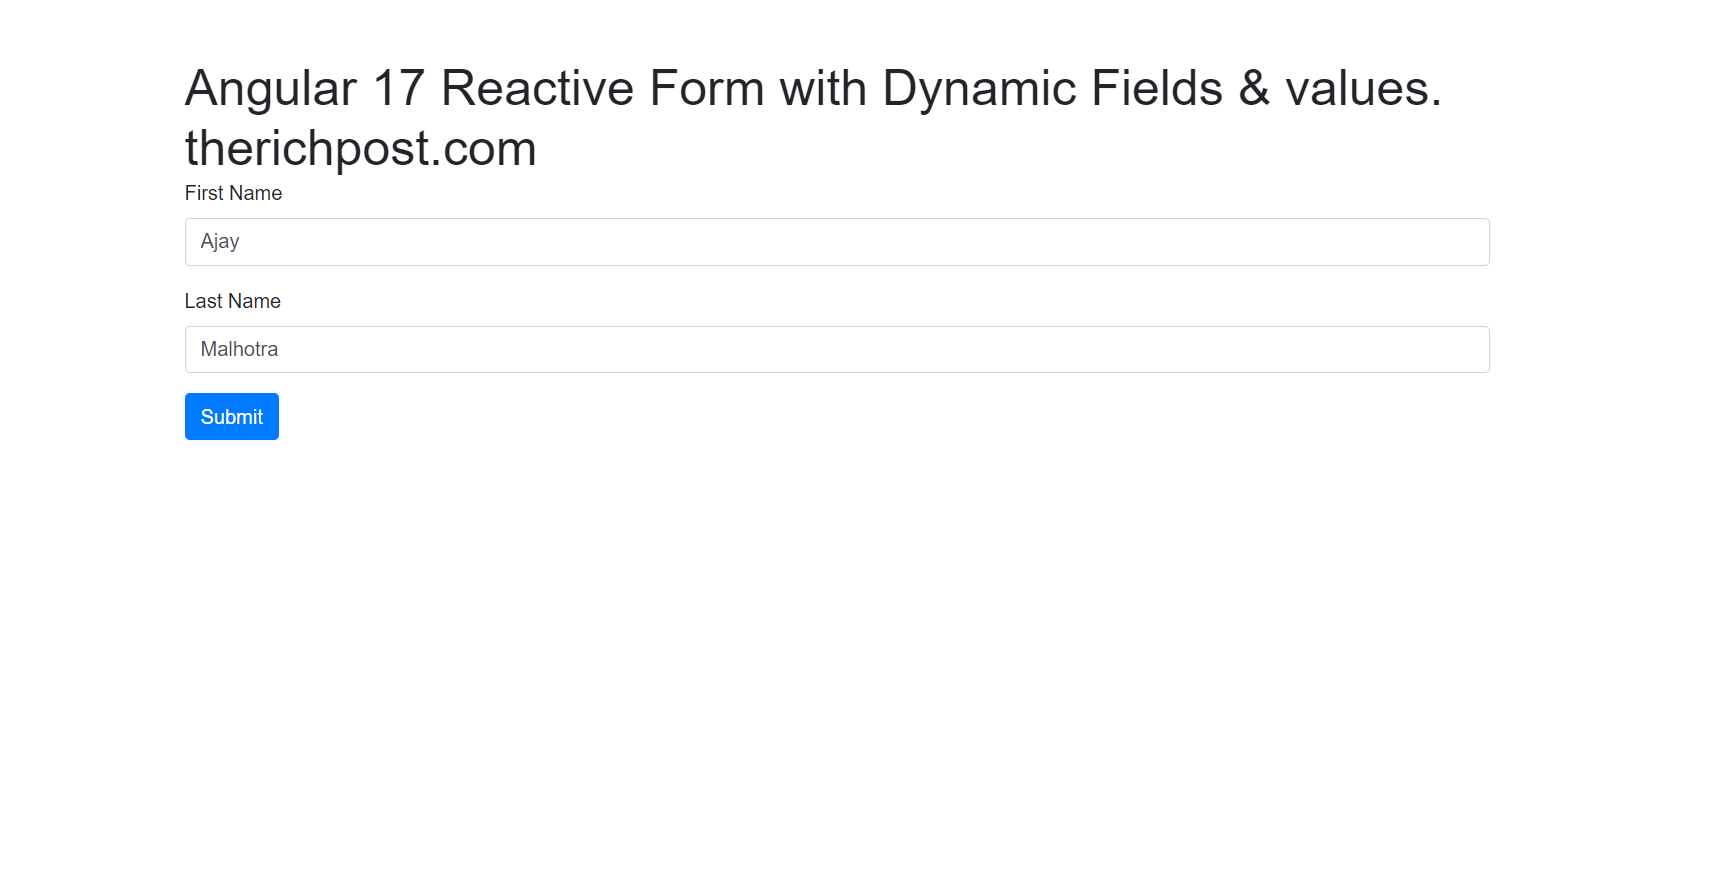 Angular 17 Reactive Form with Dynamic Fields & values